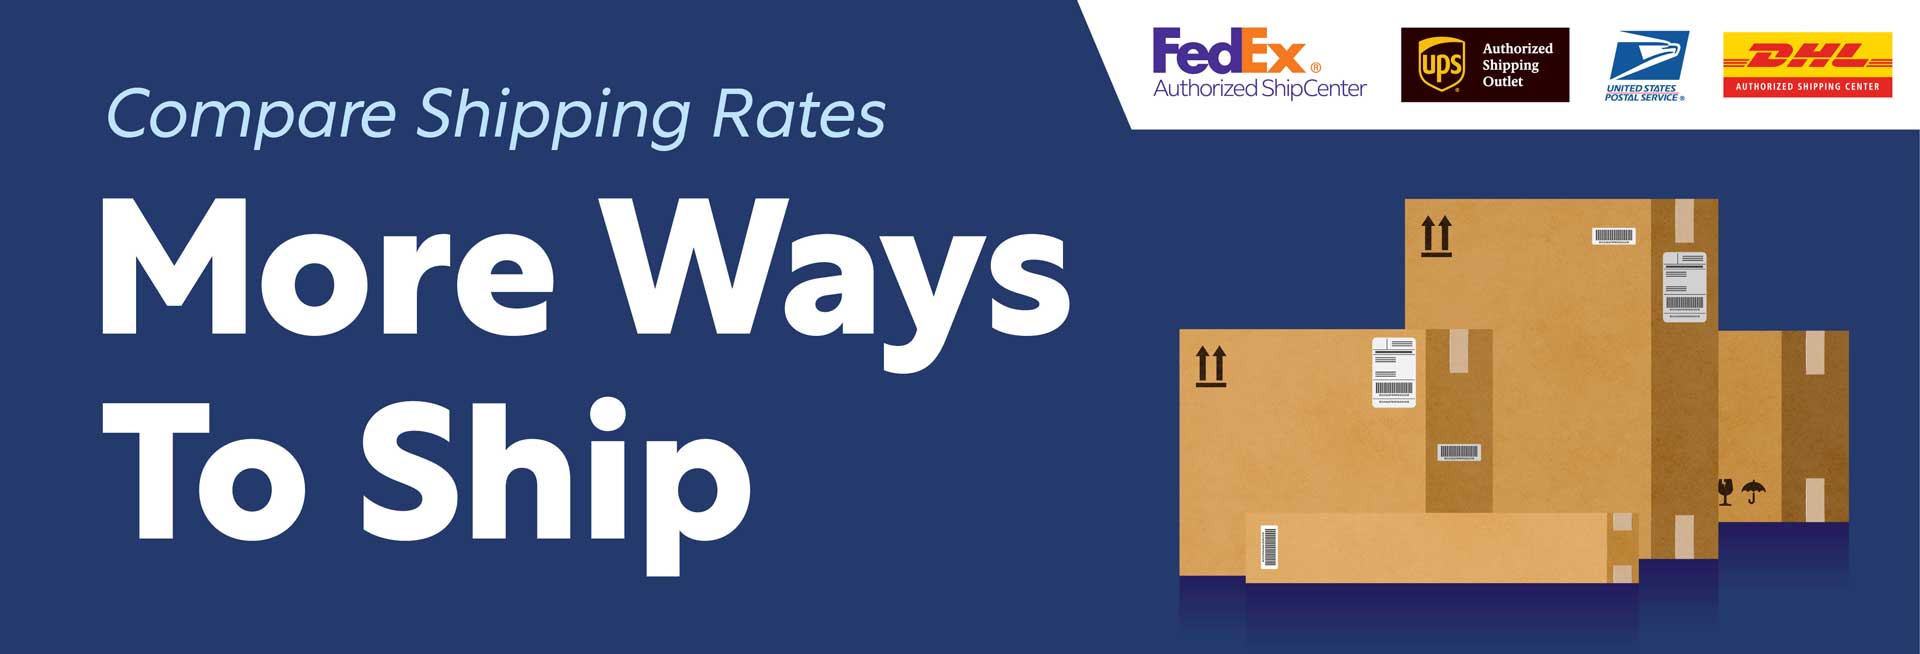 Compare Shipping Rates - More Ways to Ship.